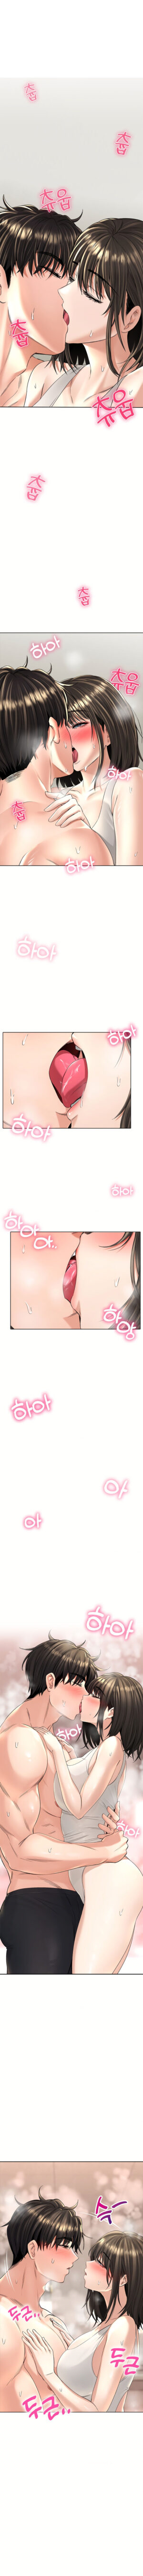 [Lee Juwon] Herbal Love Story (1-21) [English] [Omega Scans] [Ongoing]